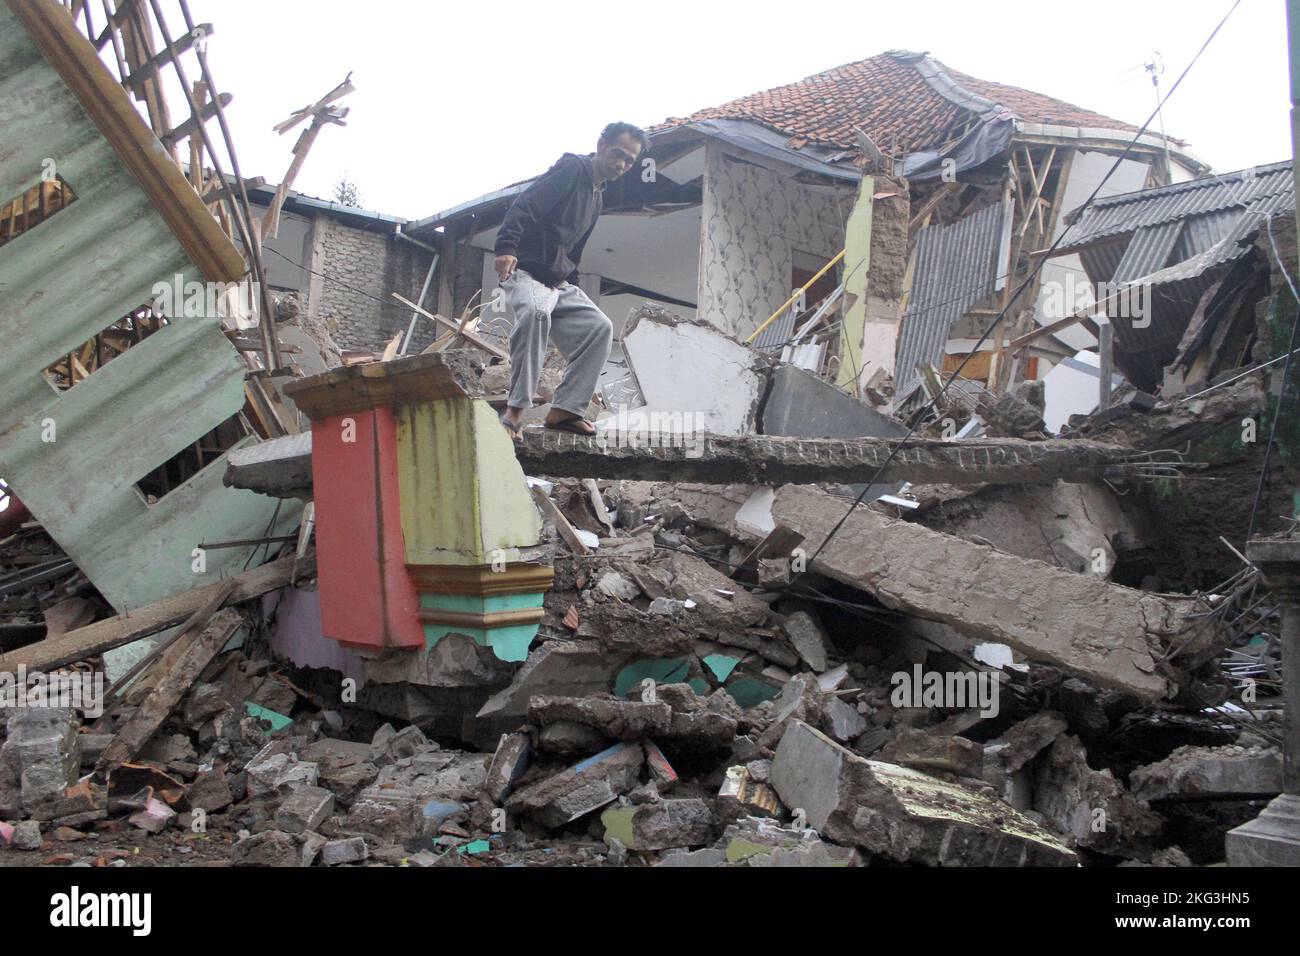 West Java, Indonesia. 21st Nov, 2022. A man walks on the debris of damaged houses after a 5.6-magnitude earthquake in Cianjur, West Java, Indonesia, Nov. 21, 2022. At least 62 people were killed, 25 went missing and about 700 others were injured after a 5.6-magnitude earthquake hit Indonesia's West Java province on Monday, officials said. Credit: Sandika Fadilah/Xinhua/Alamy Live News Stock Photo